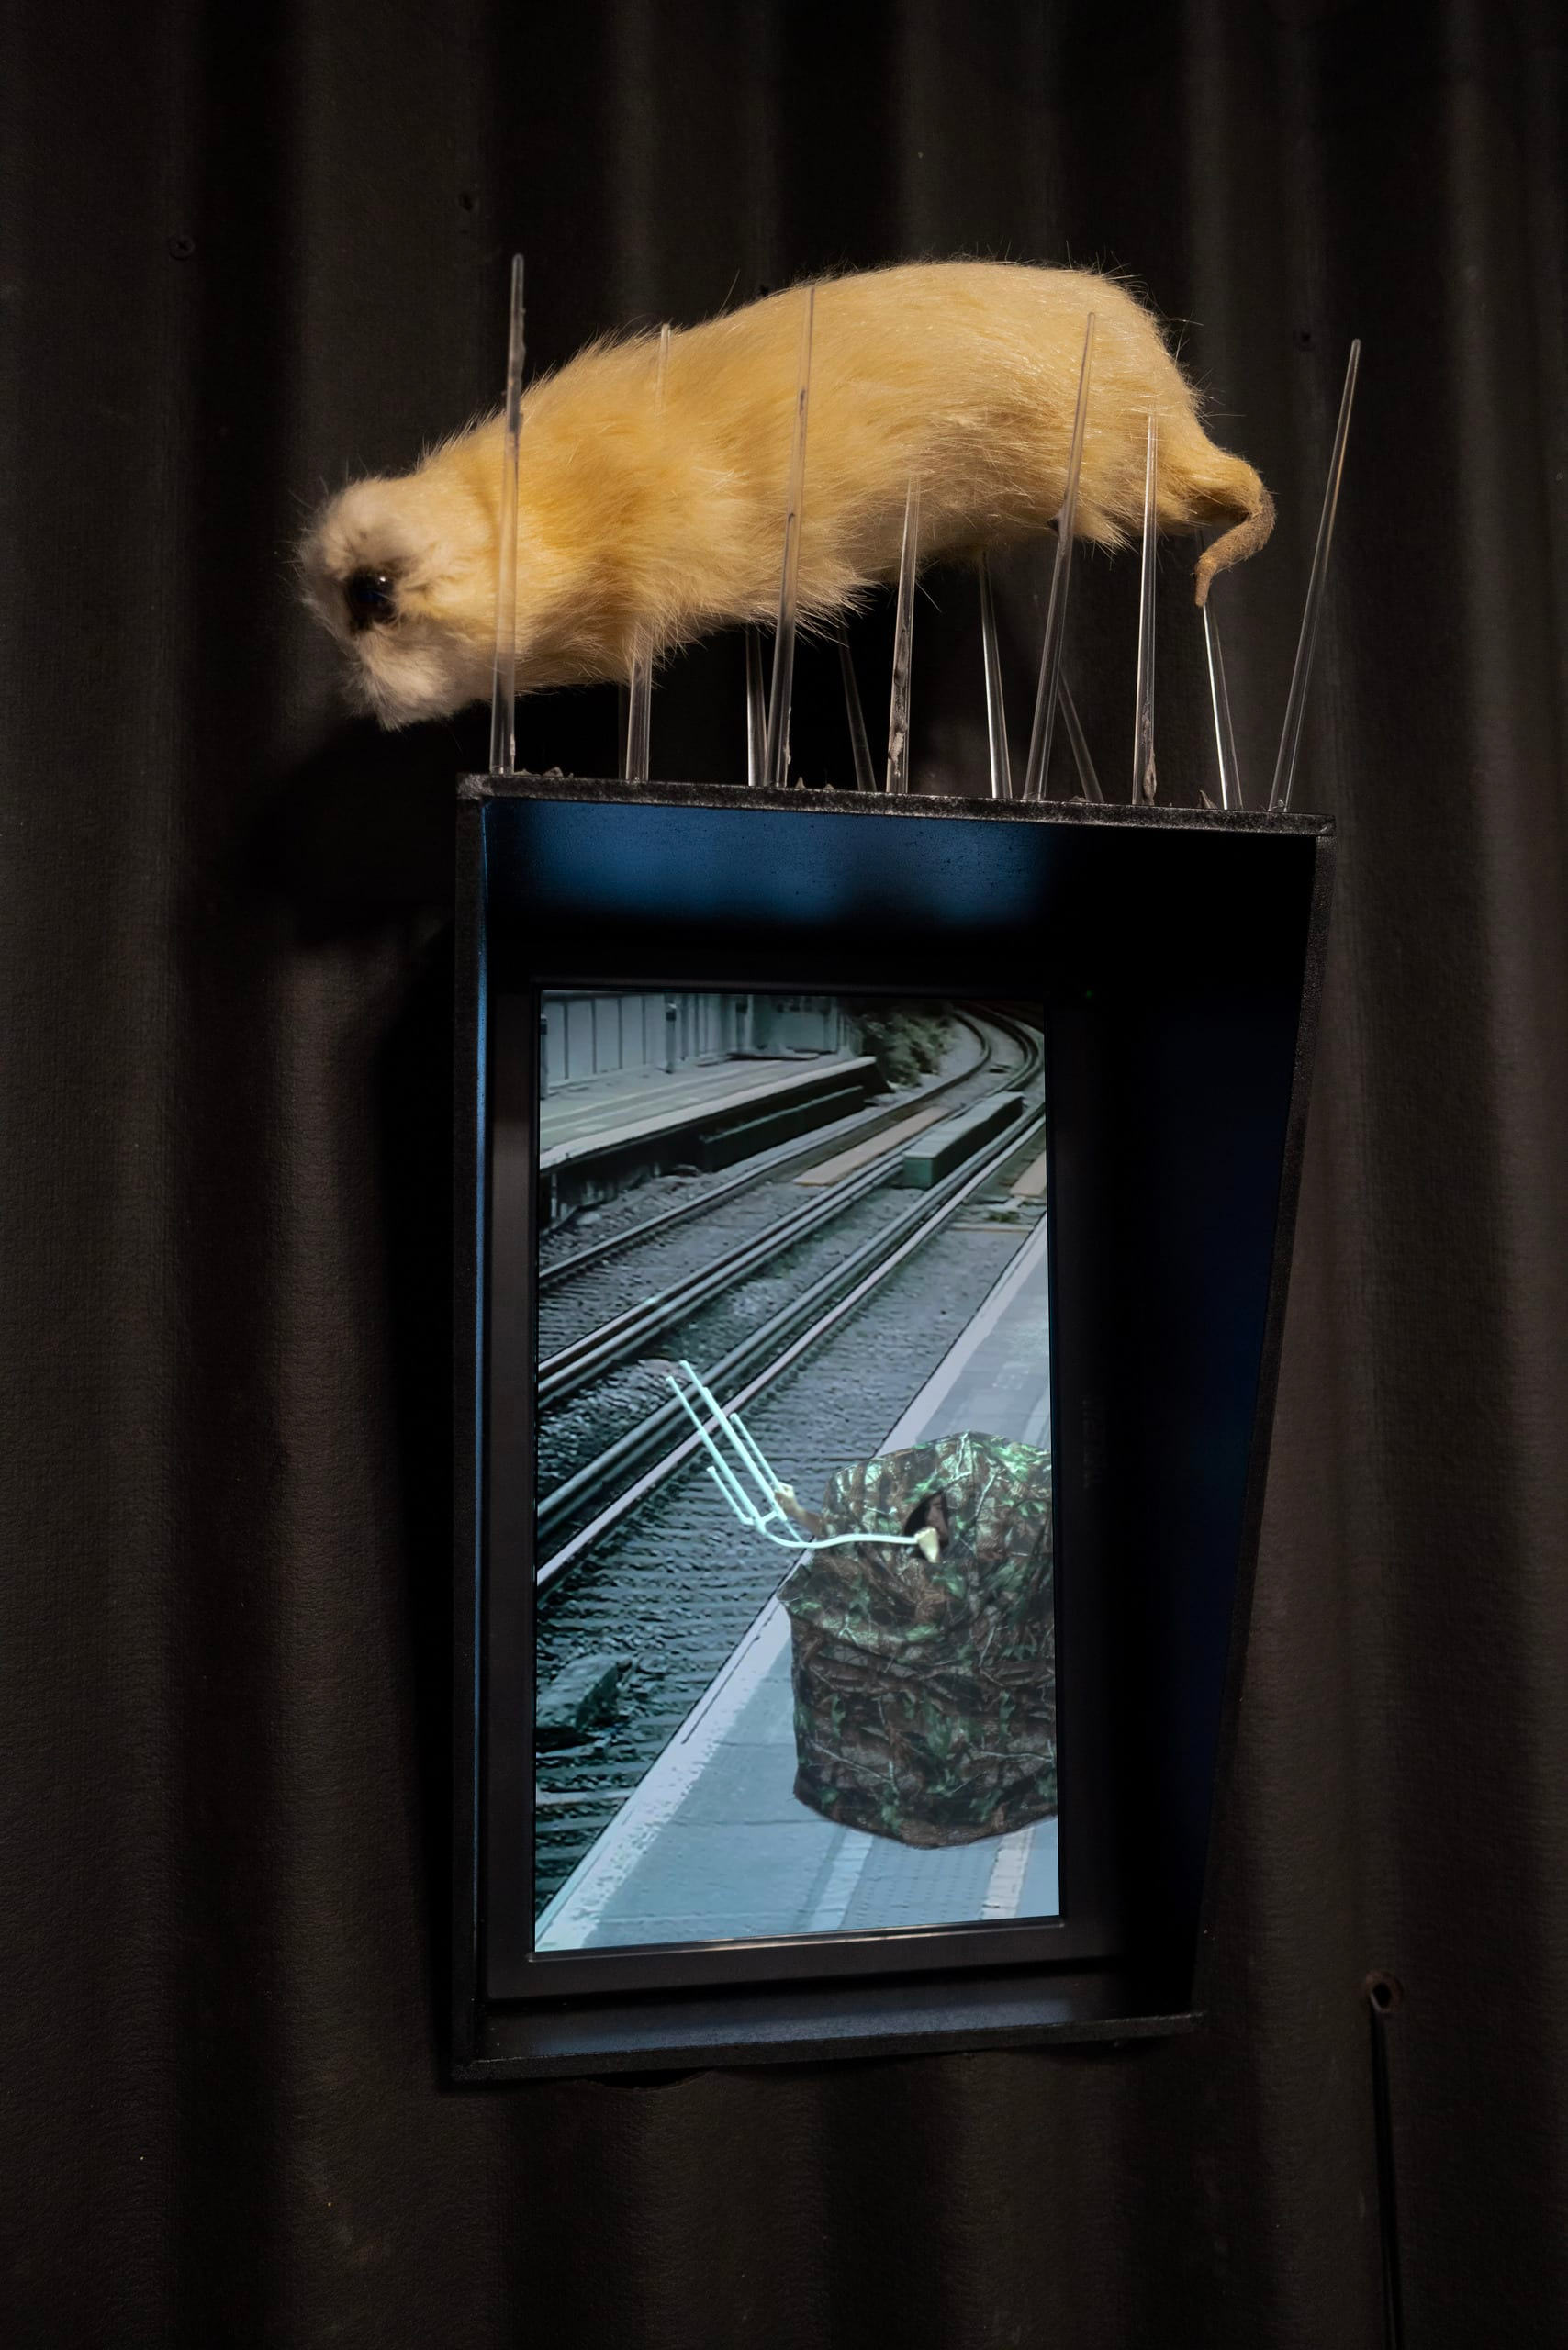 Photograph of a golden, furred limbless stuffed ferret-like creature with large eyes, sat between long clear thin spikes on top of a framed photograph of an object on a railway platform.